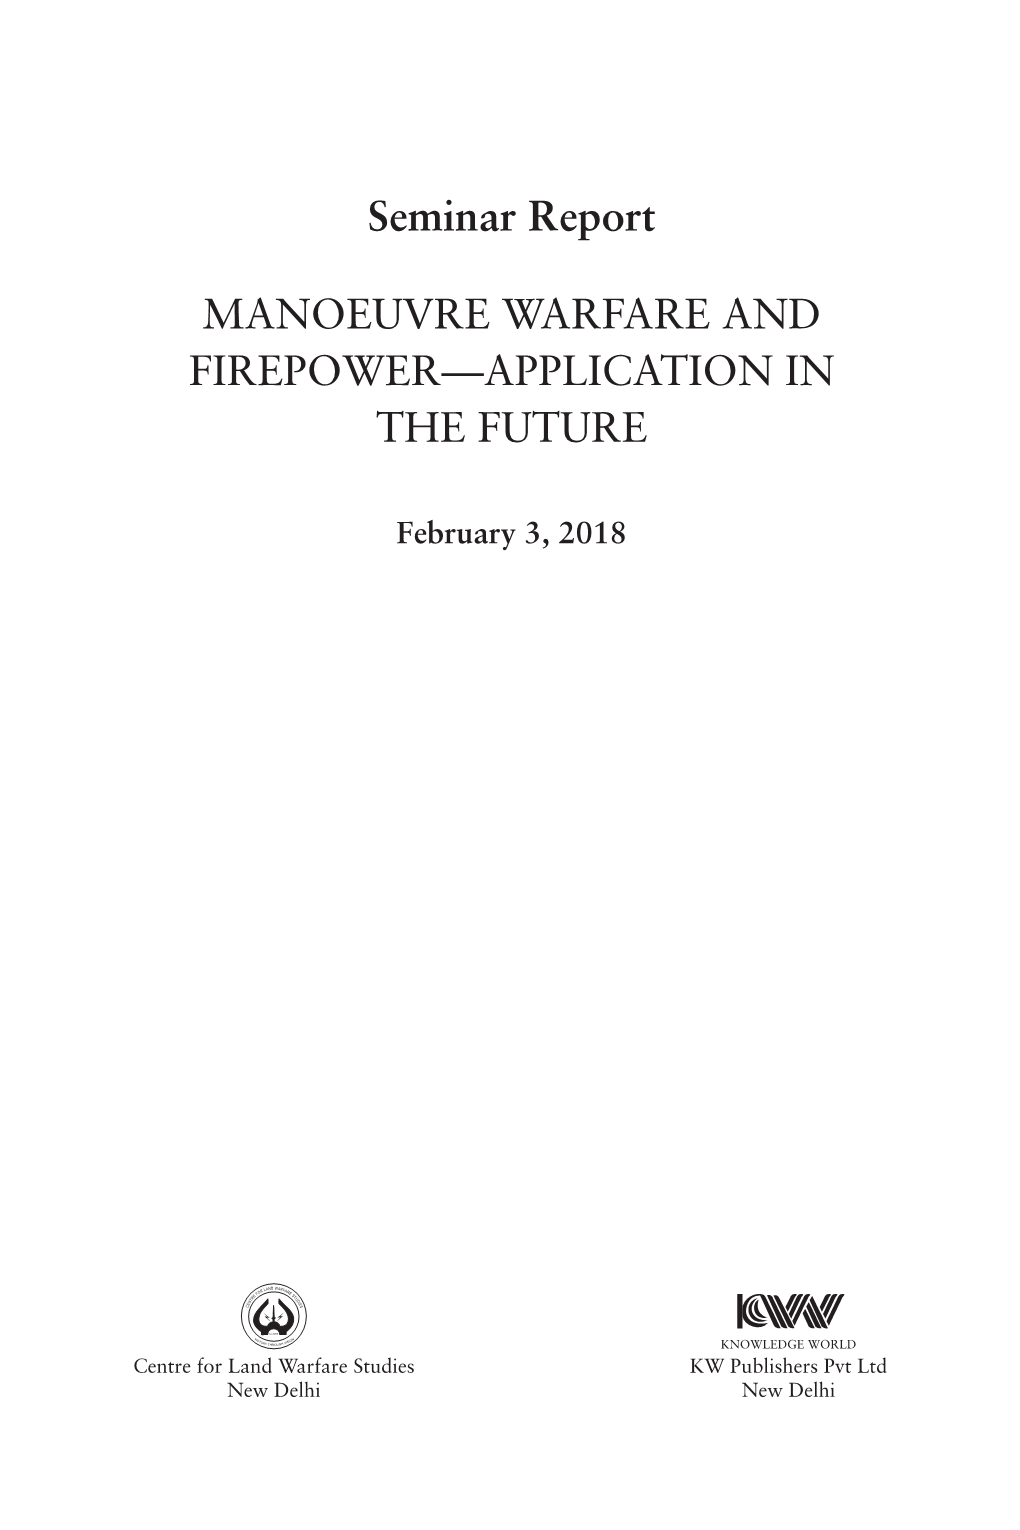 Manoeuvre Warfare and Firepower—Application in the Future